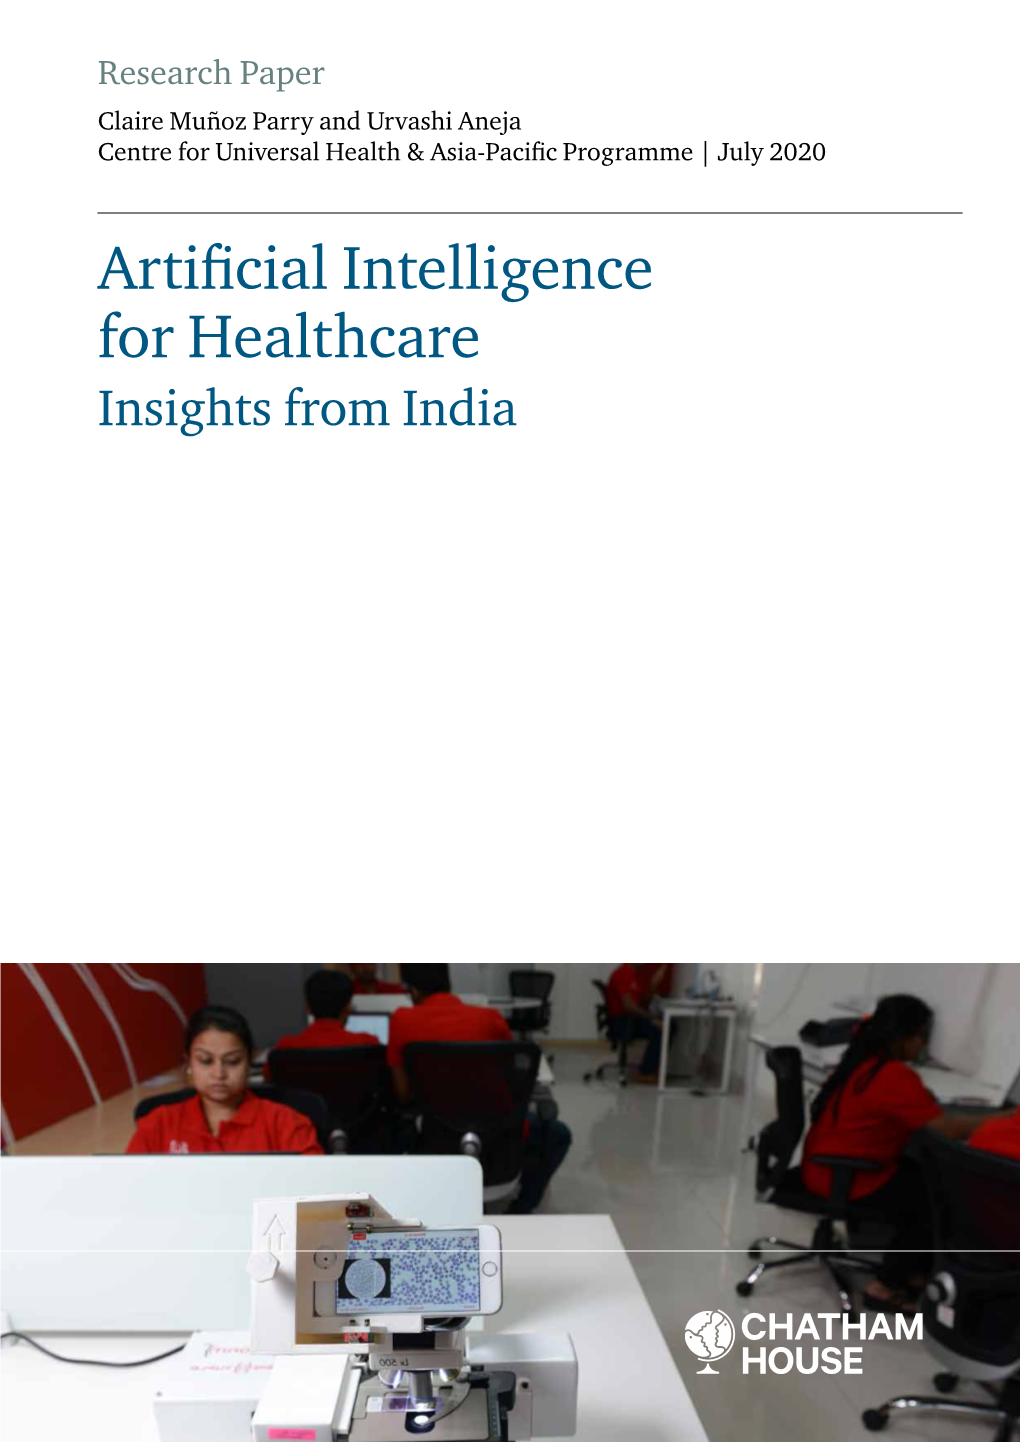 Artificial Intelligence for Healthcare Insights from India Contents